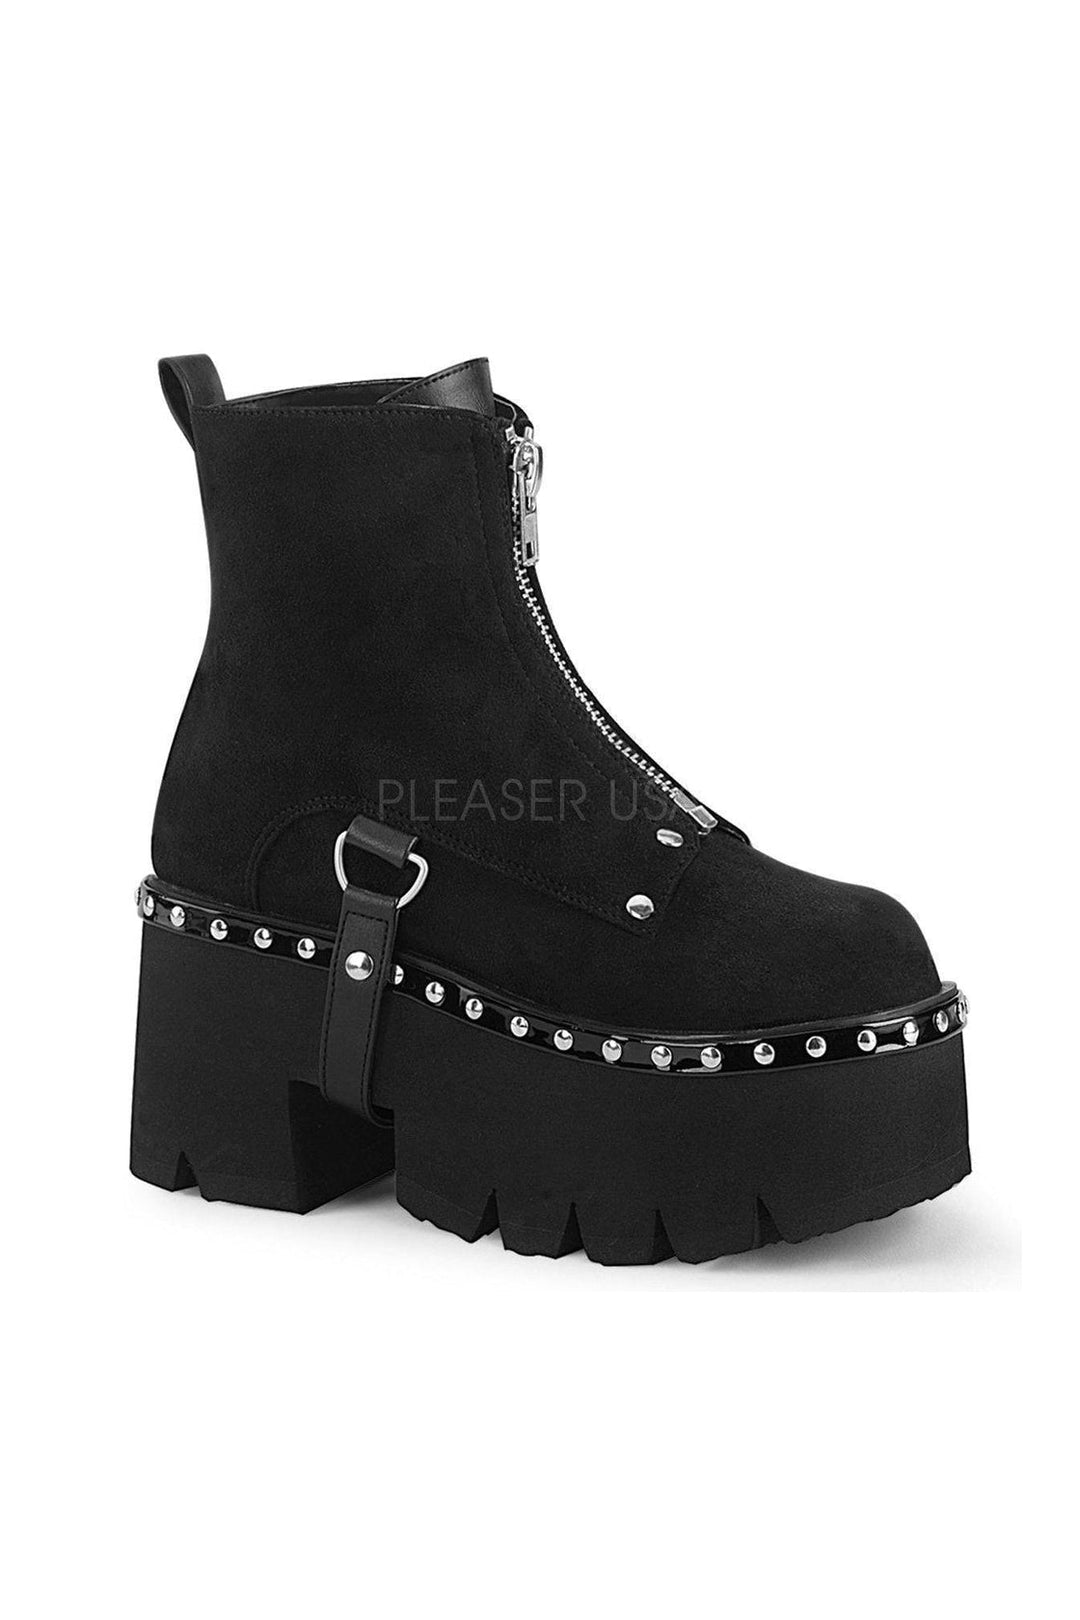 ASHES-100 Demonia Ankle Boot-Demonia-SEXYSHOES.COM